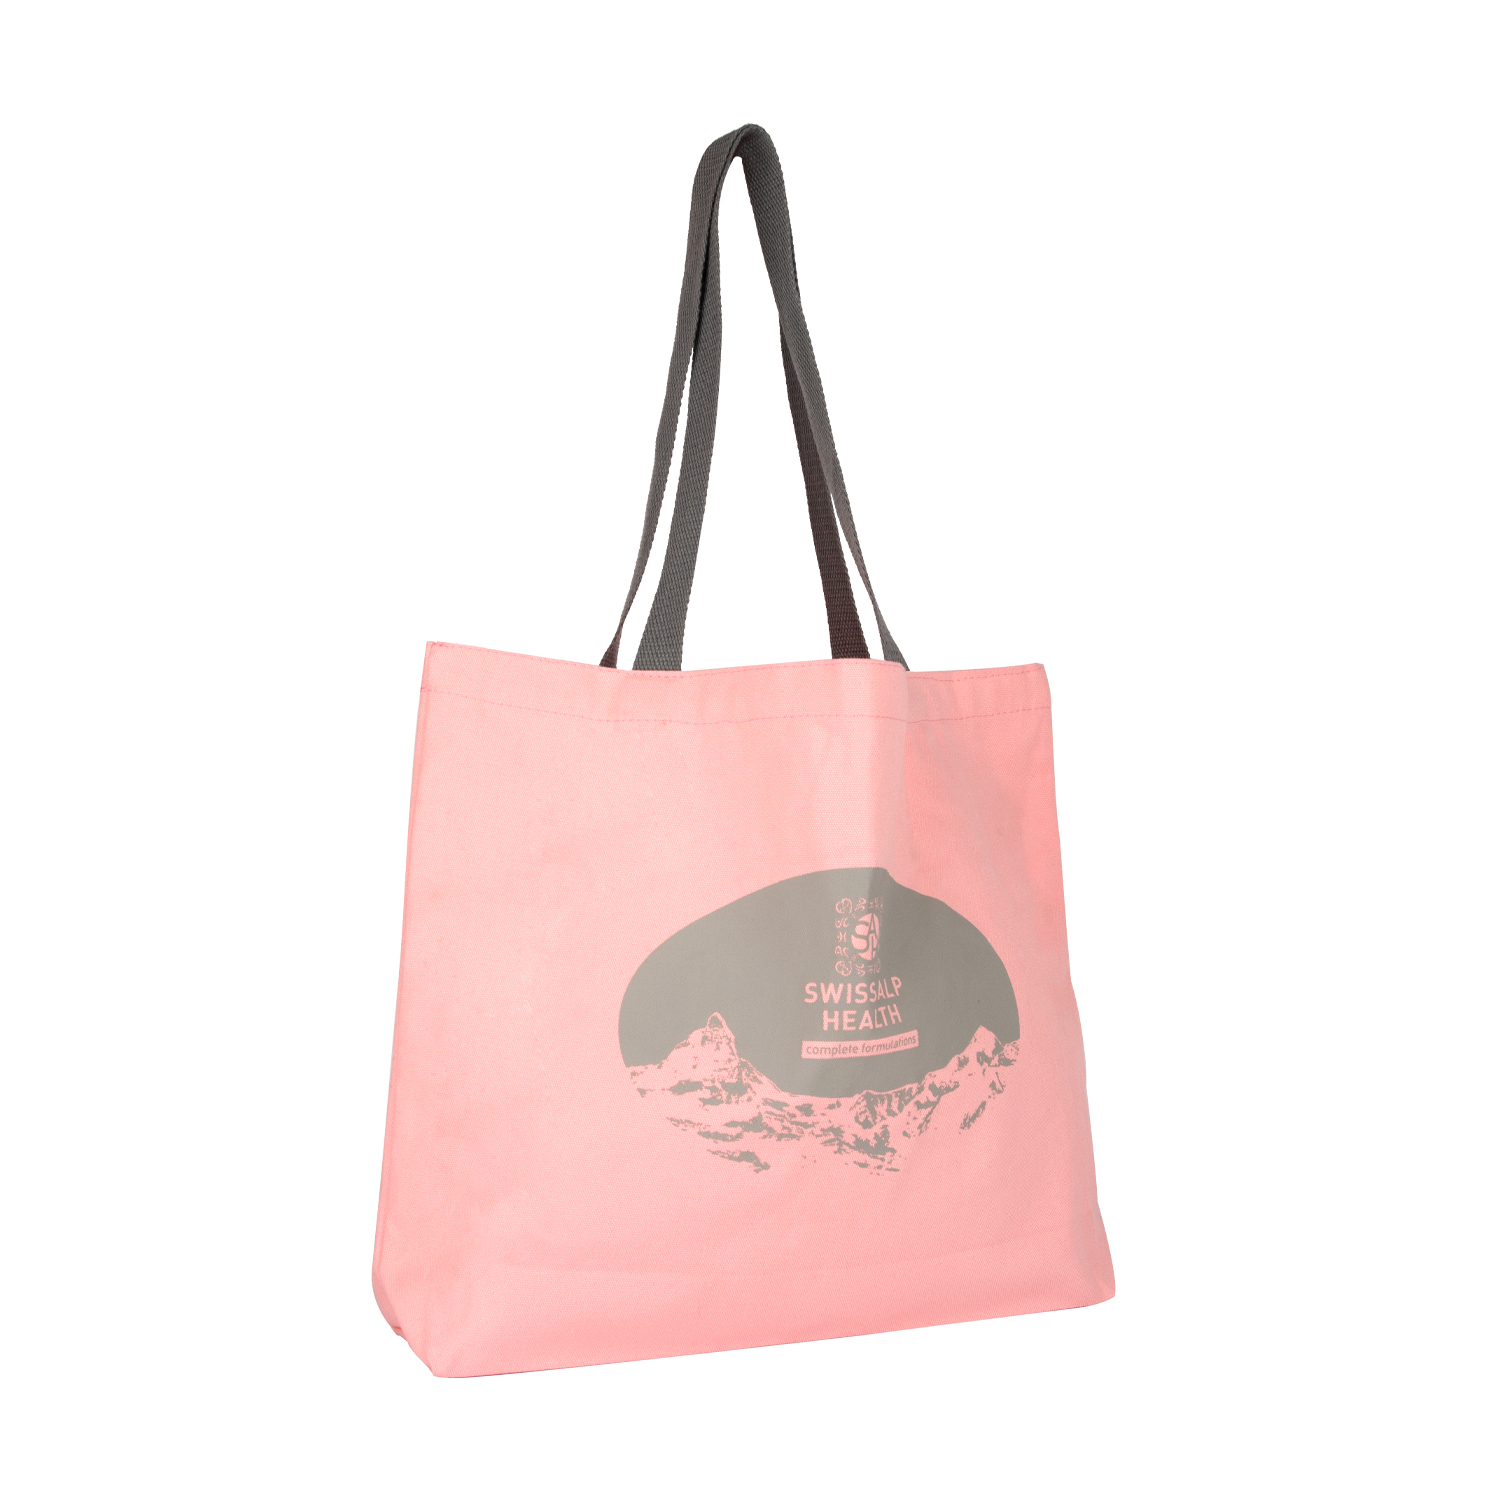 Soma Package Ltd Continues to Lead in Canvas Tote Bag Innovation